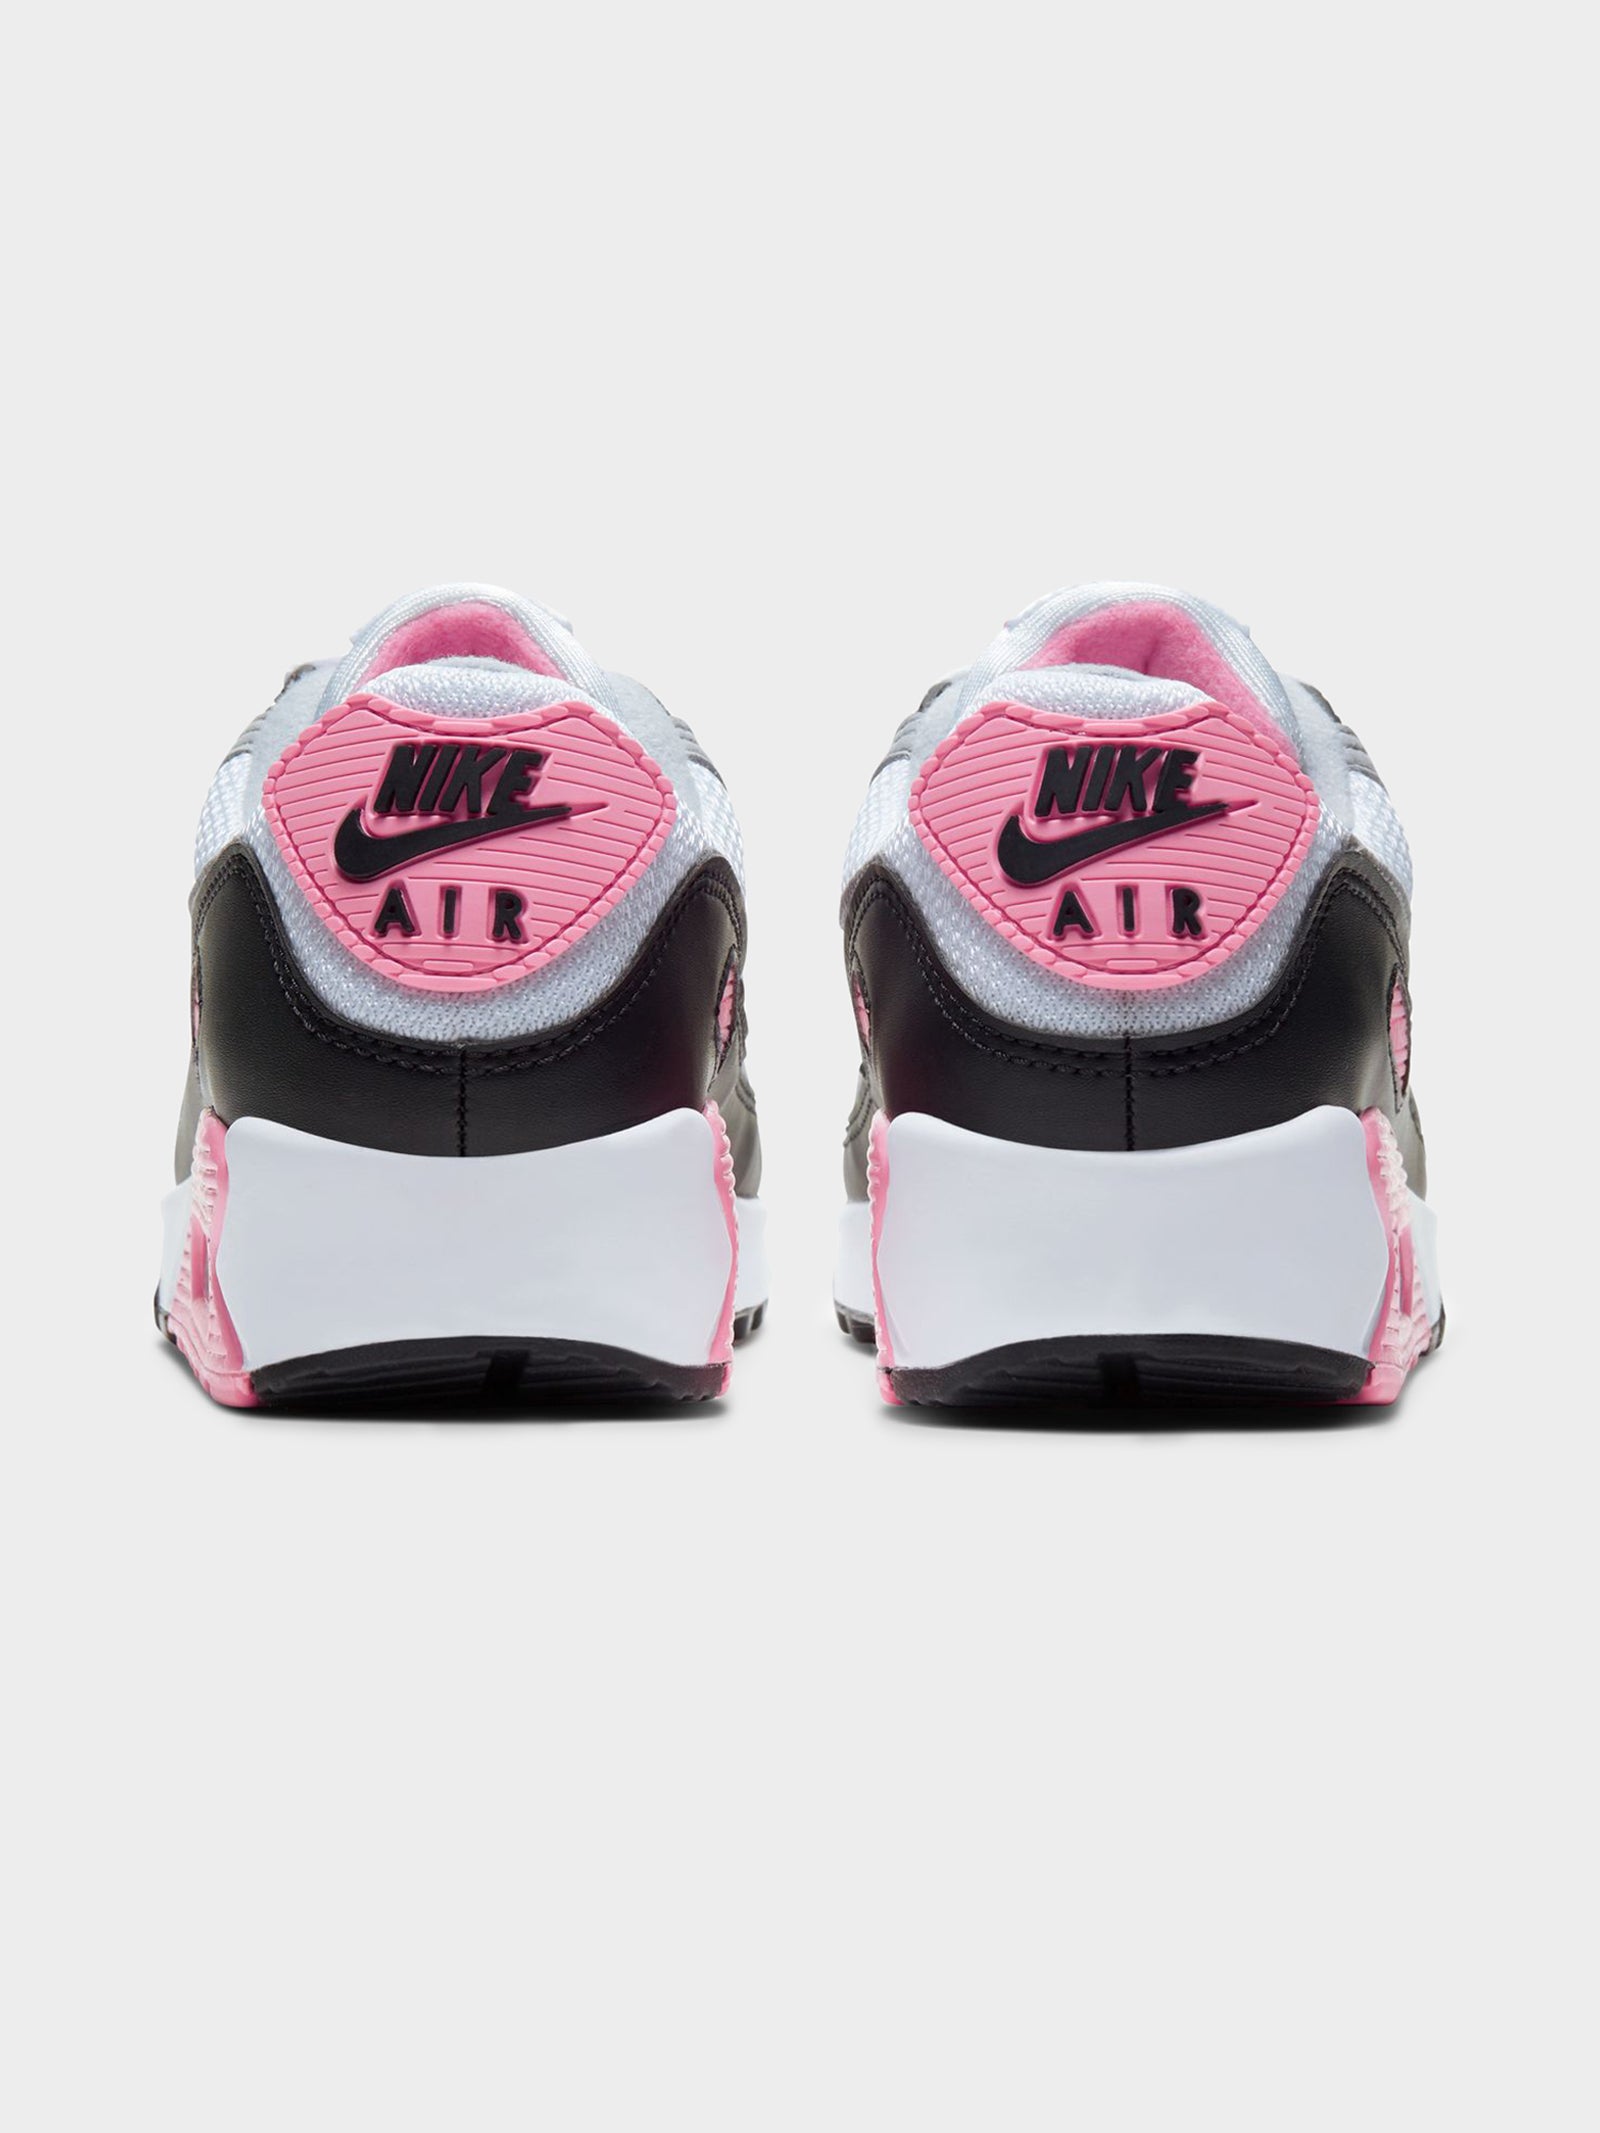 Womens Air Max 90 Sneakers in White, Grey & Rose Pink - Glue Store